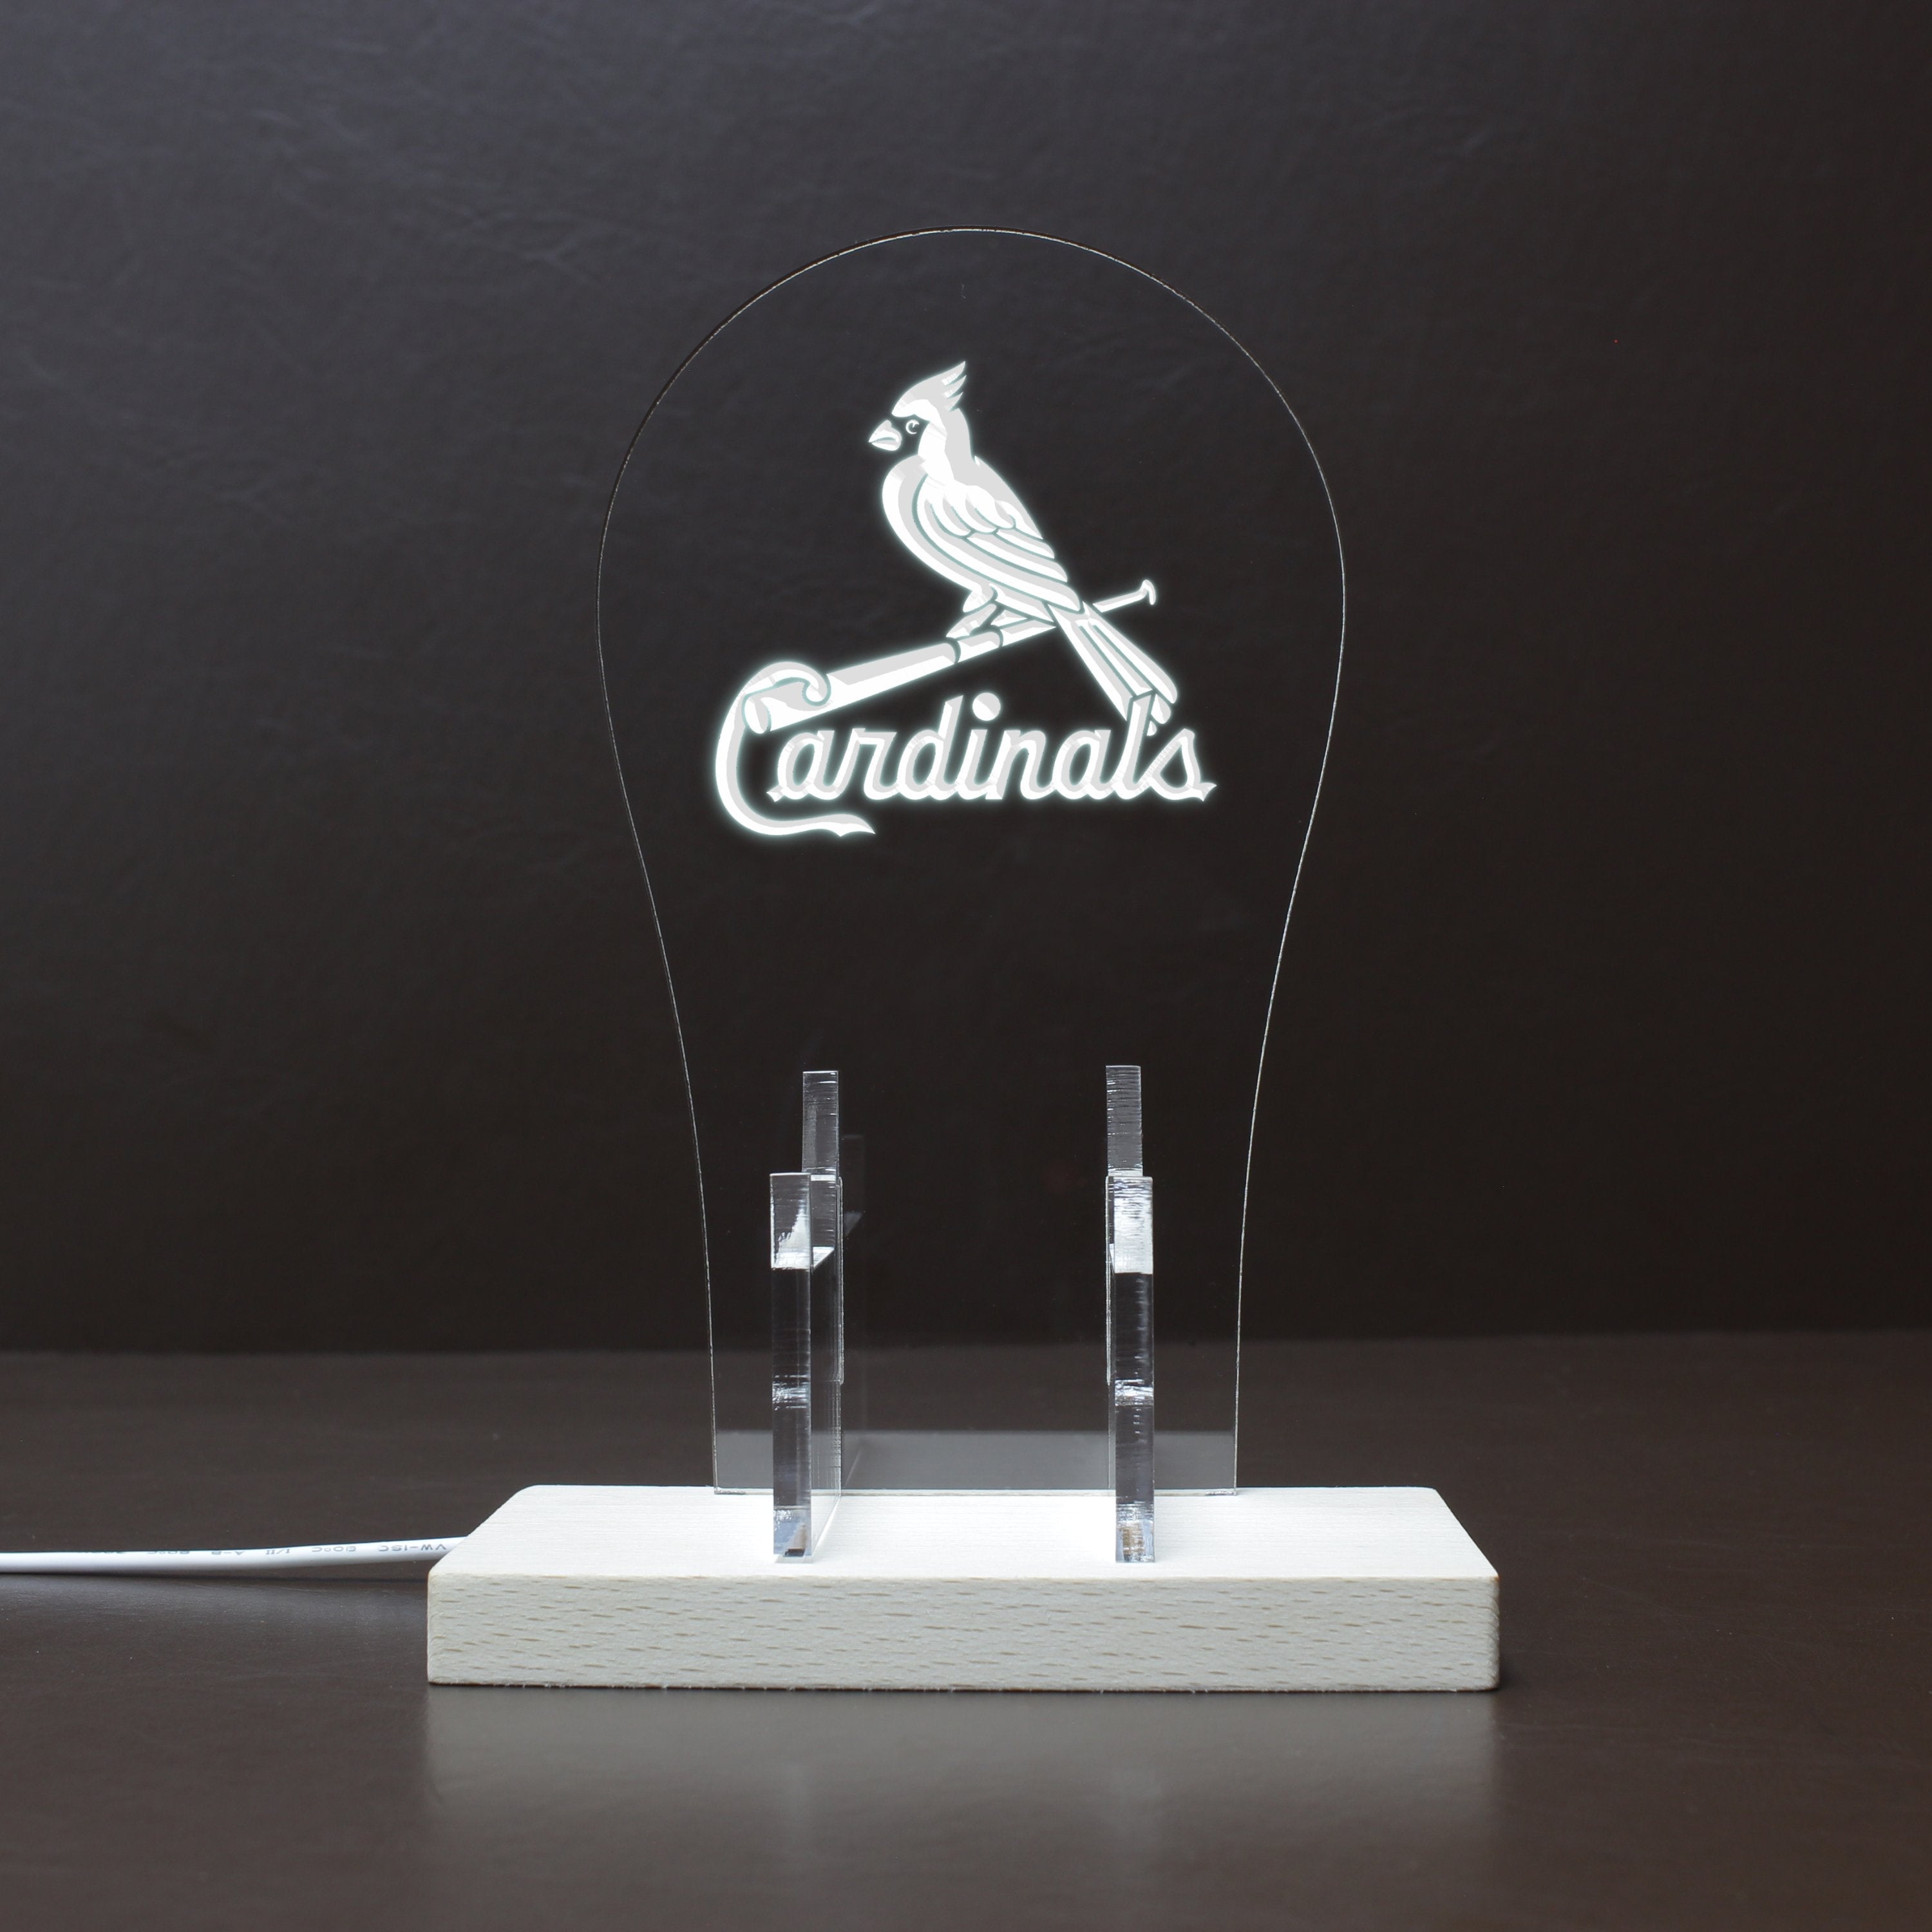 St. Louis Cardinals LED Gaming Headset Controller Stand